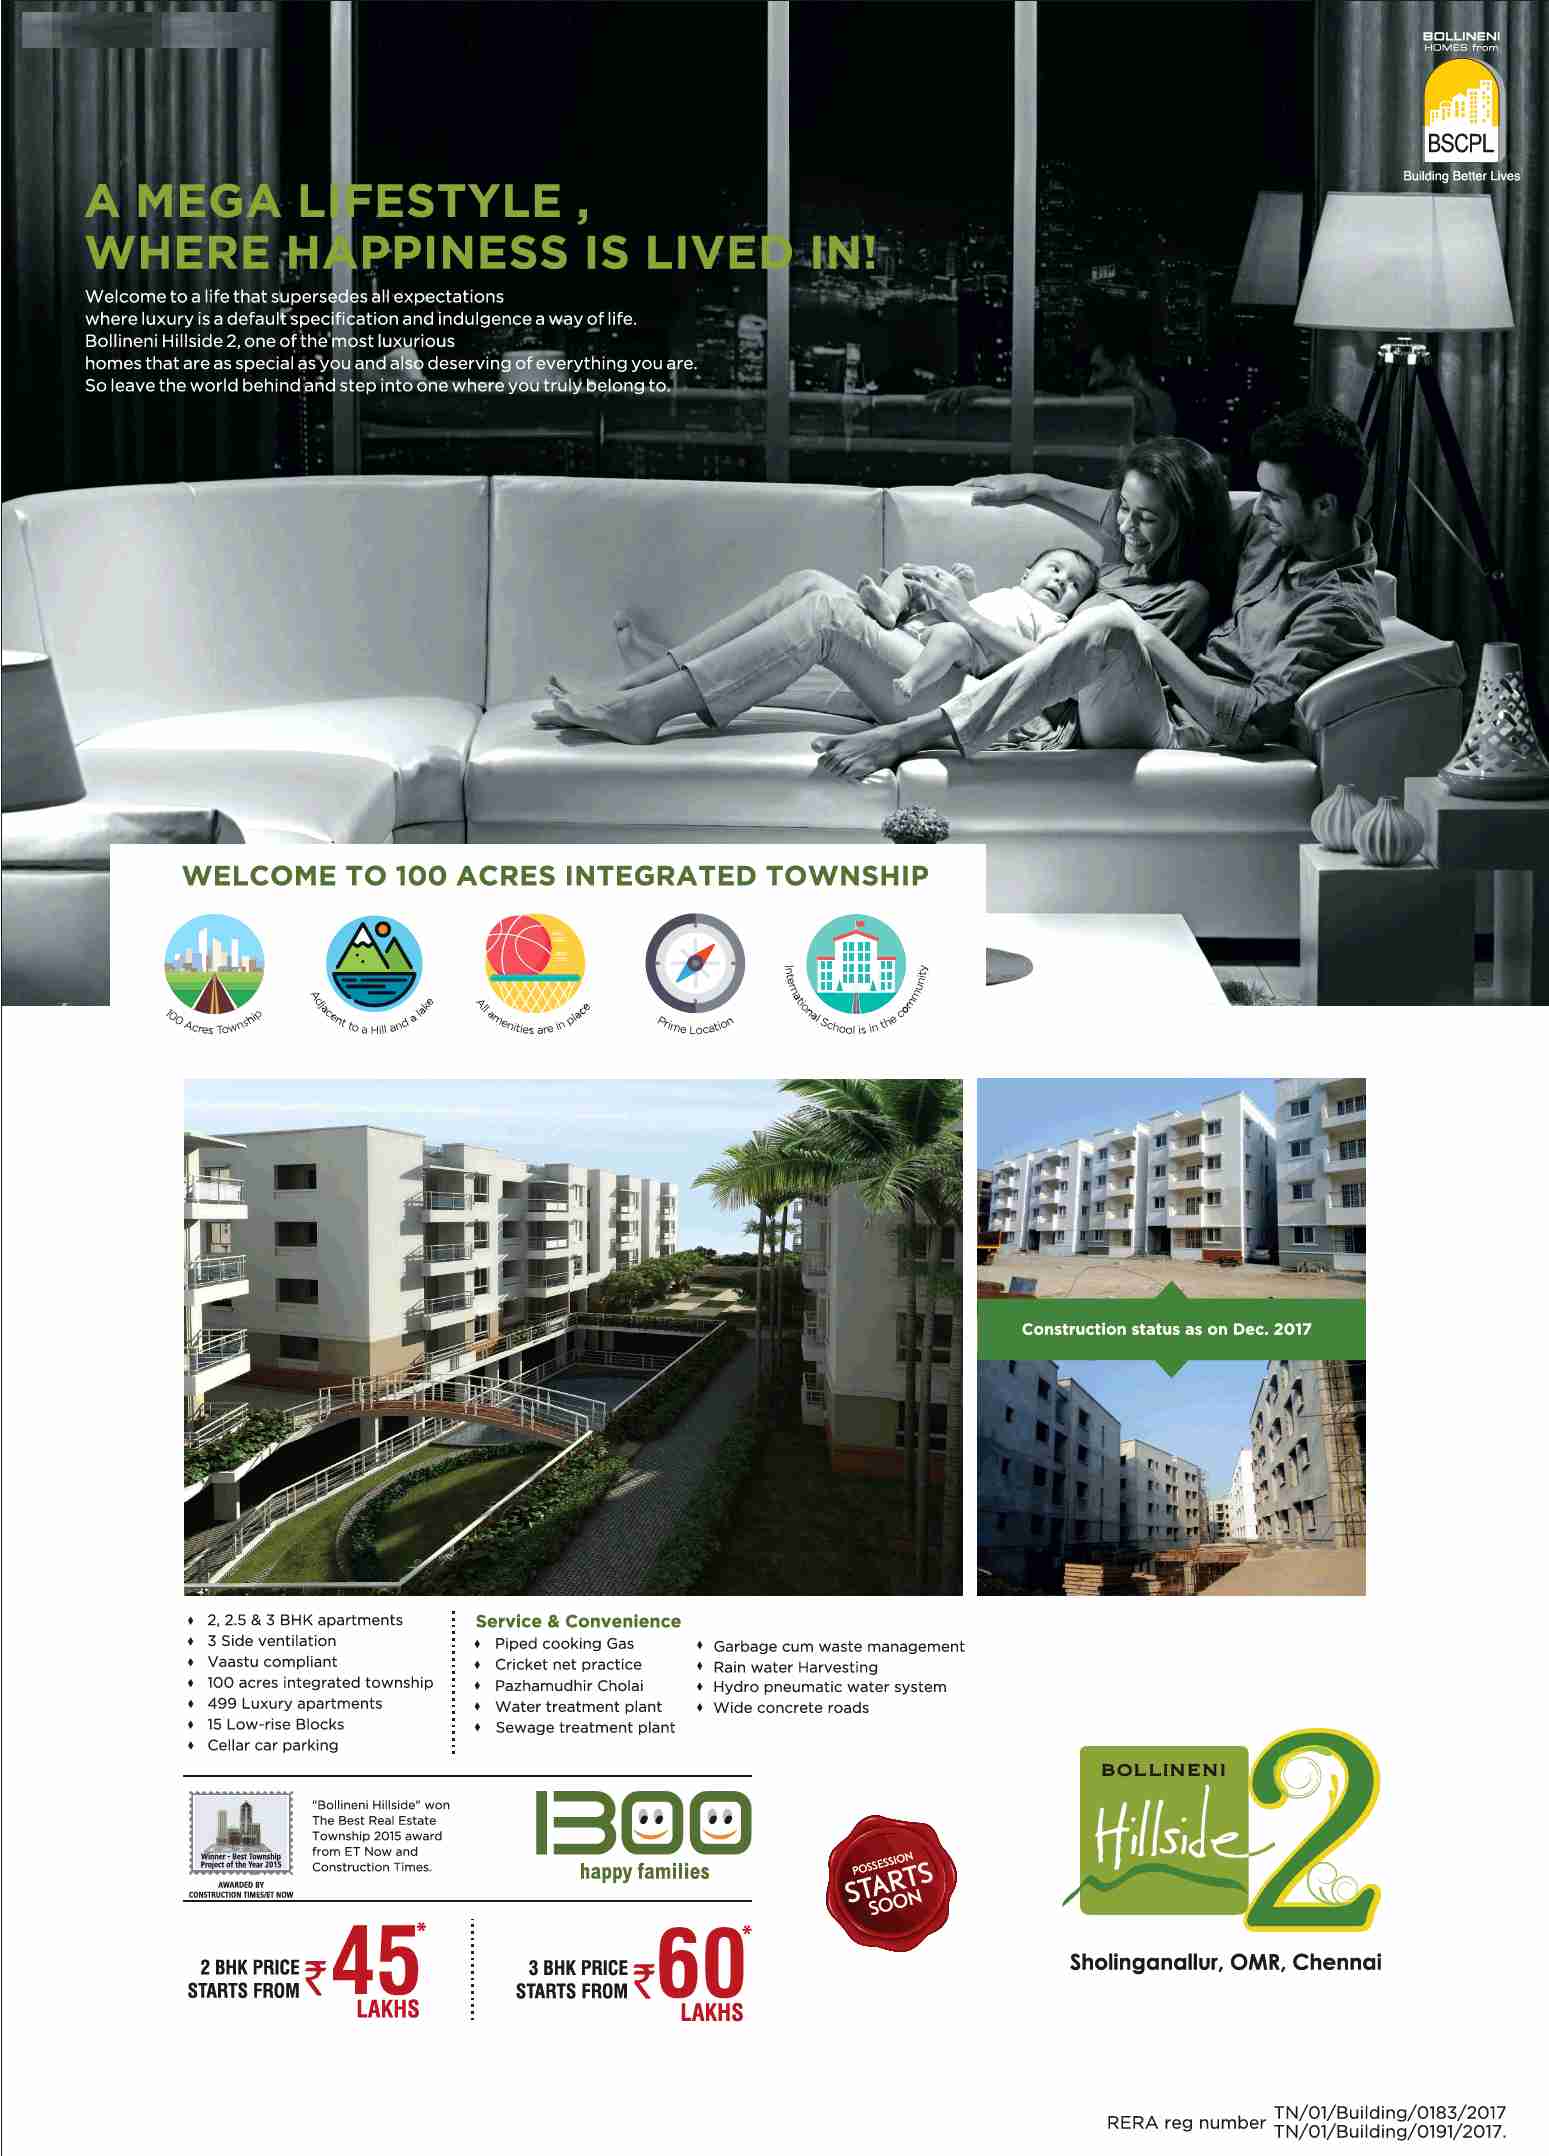 Live a mega lifestyle where happiness is lived in at BSCPL Bollineni Hillside in Chennai